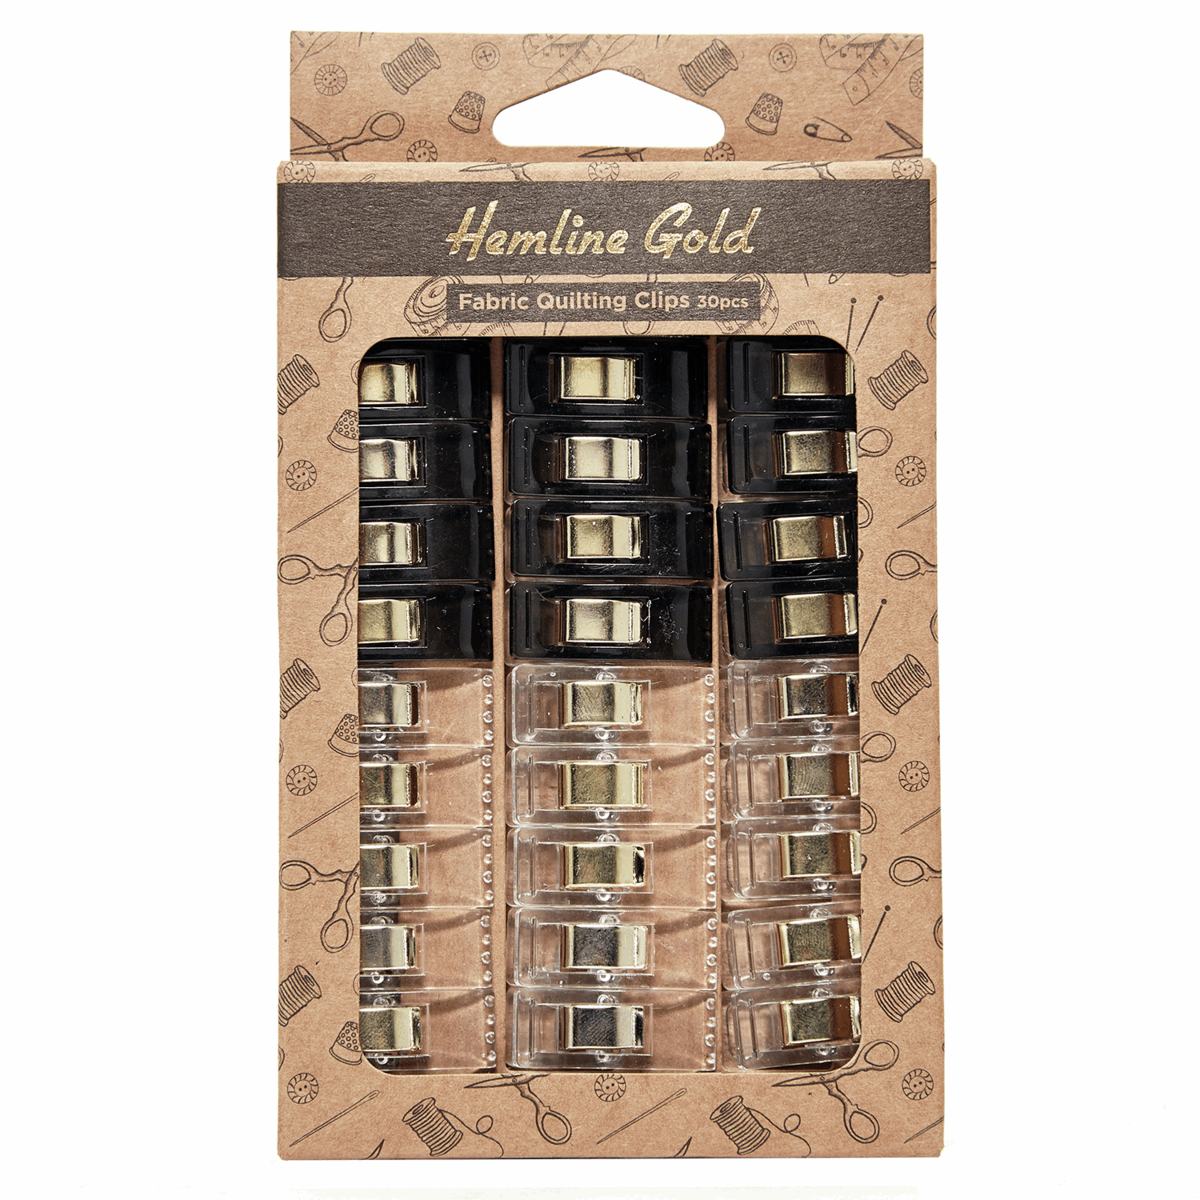 Premium Quilters Wonder Clips - Black & Clear (Pack of 30) *Hemline Gold Edition*